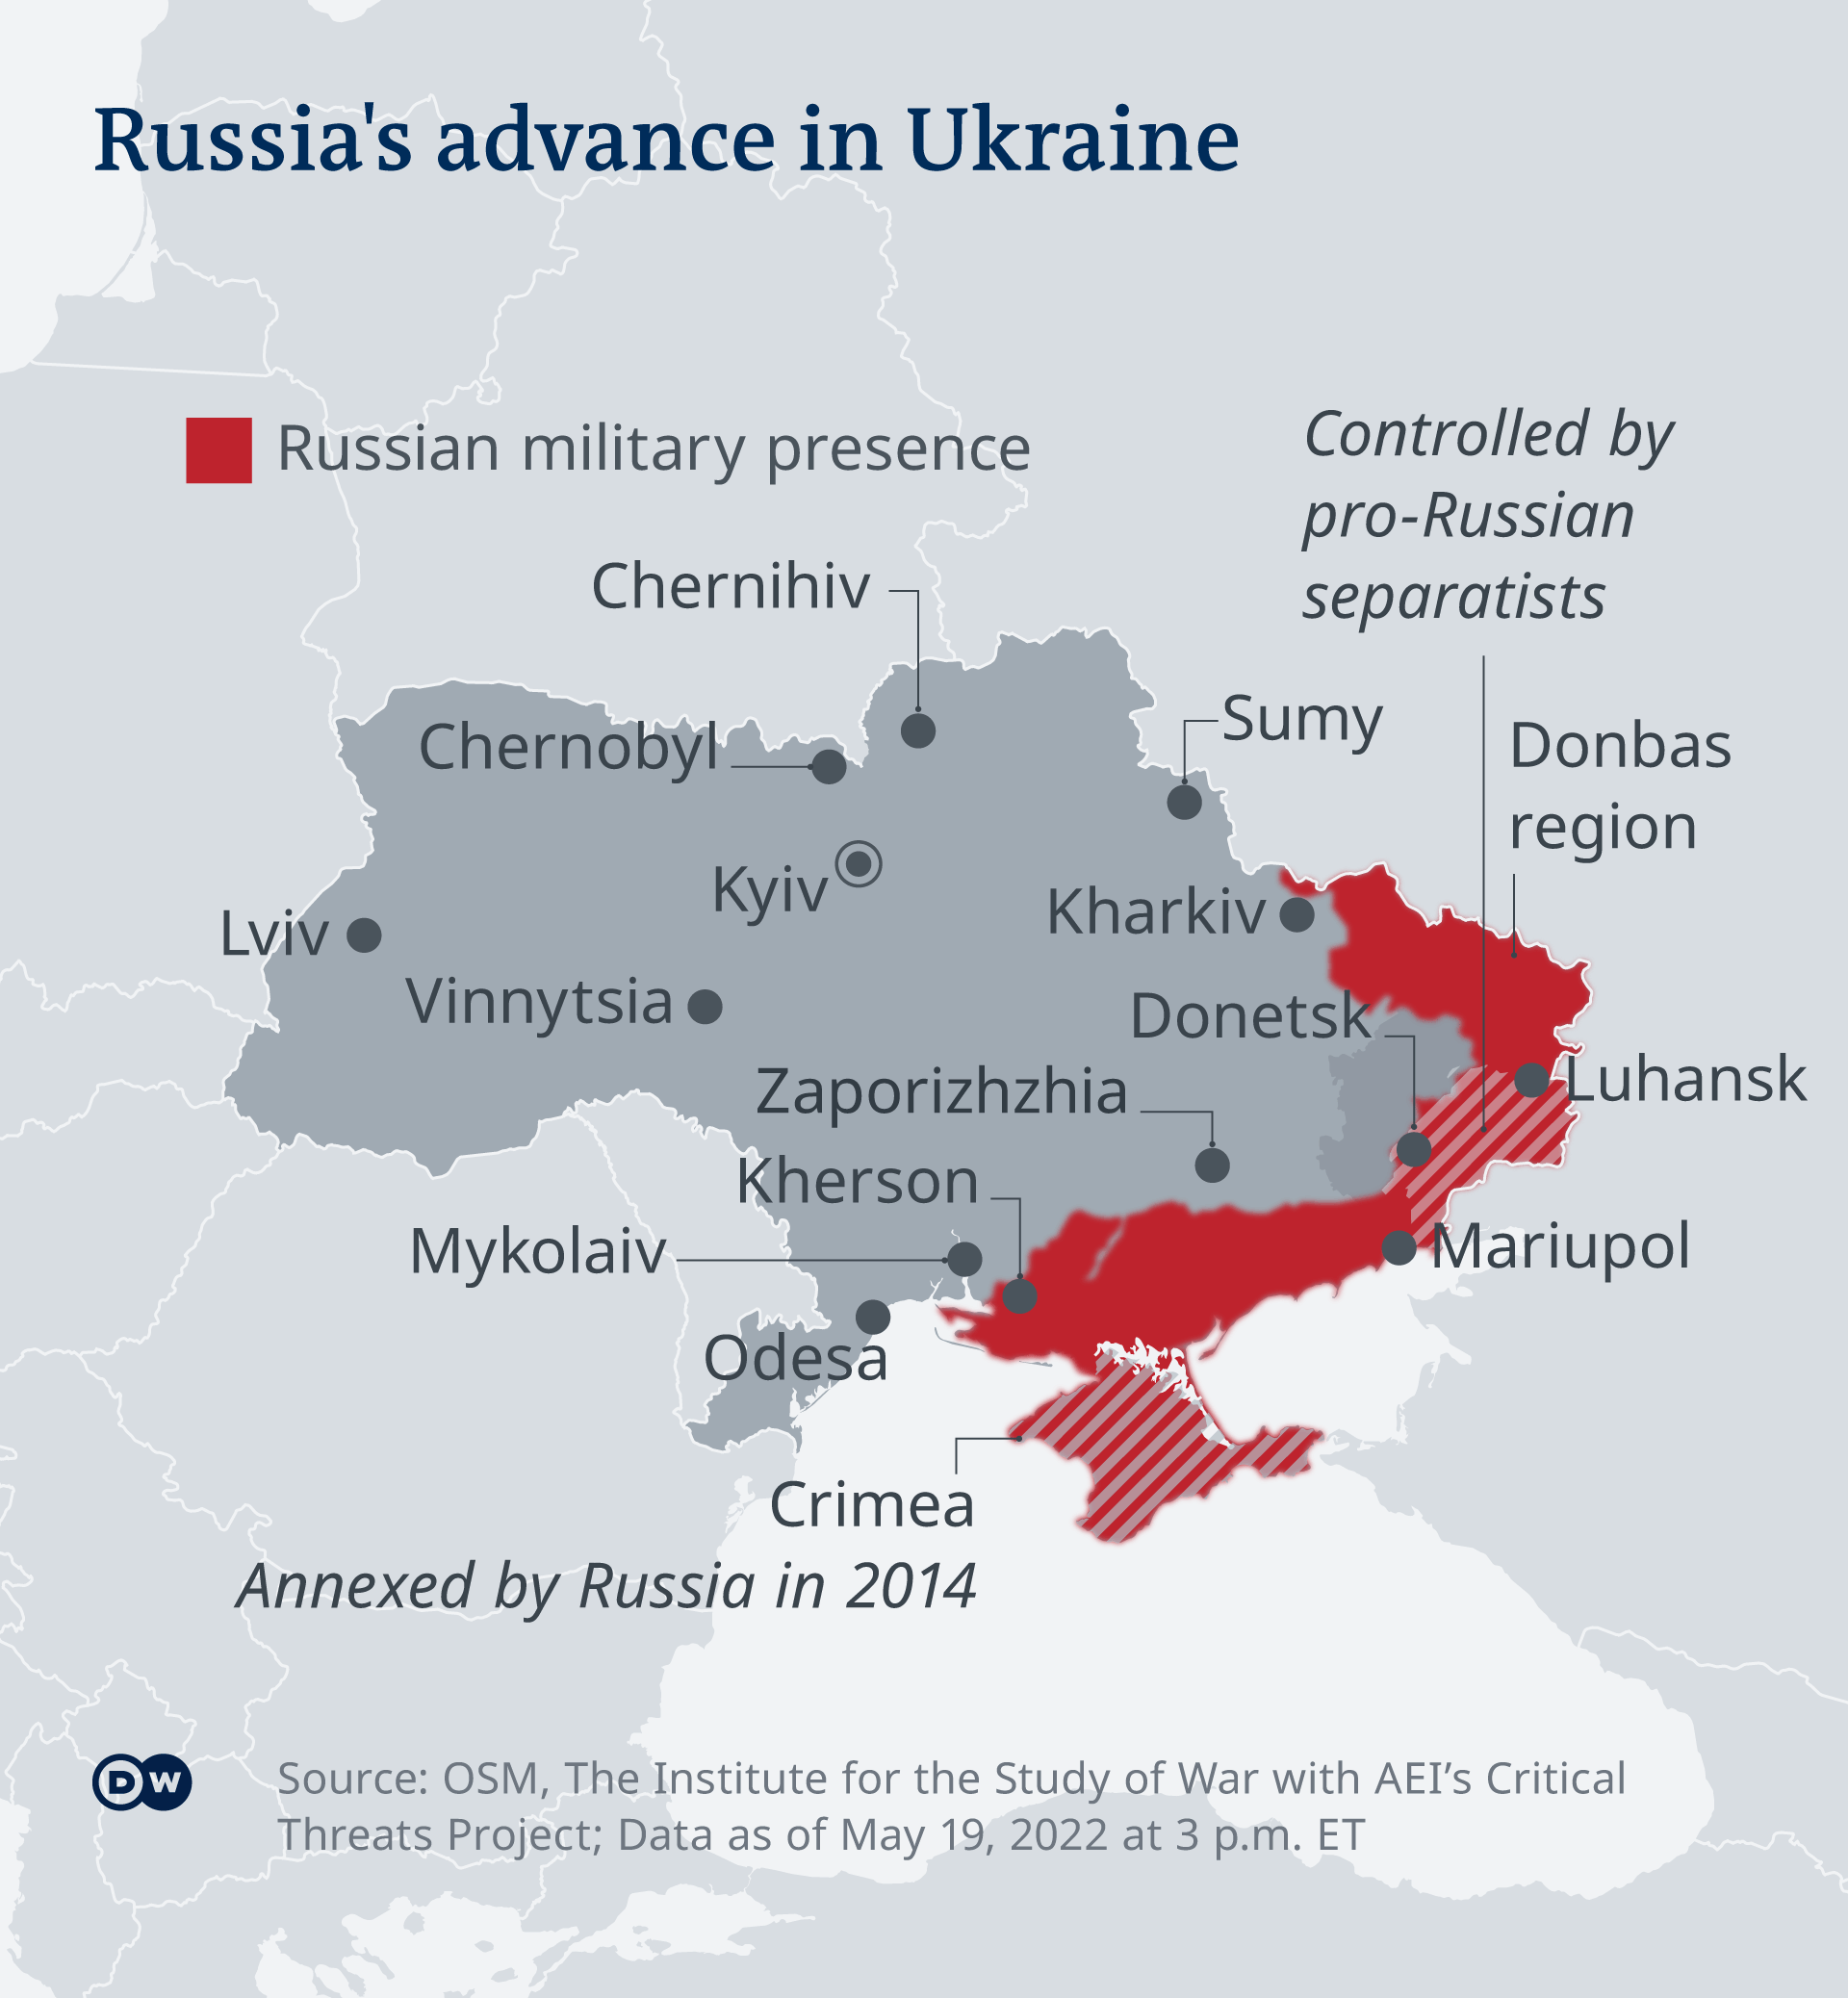 The latest information on the location of Russian troops in Ukraine